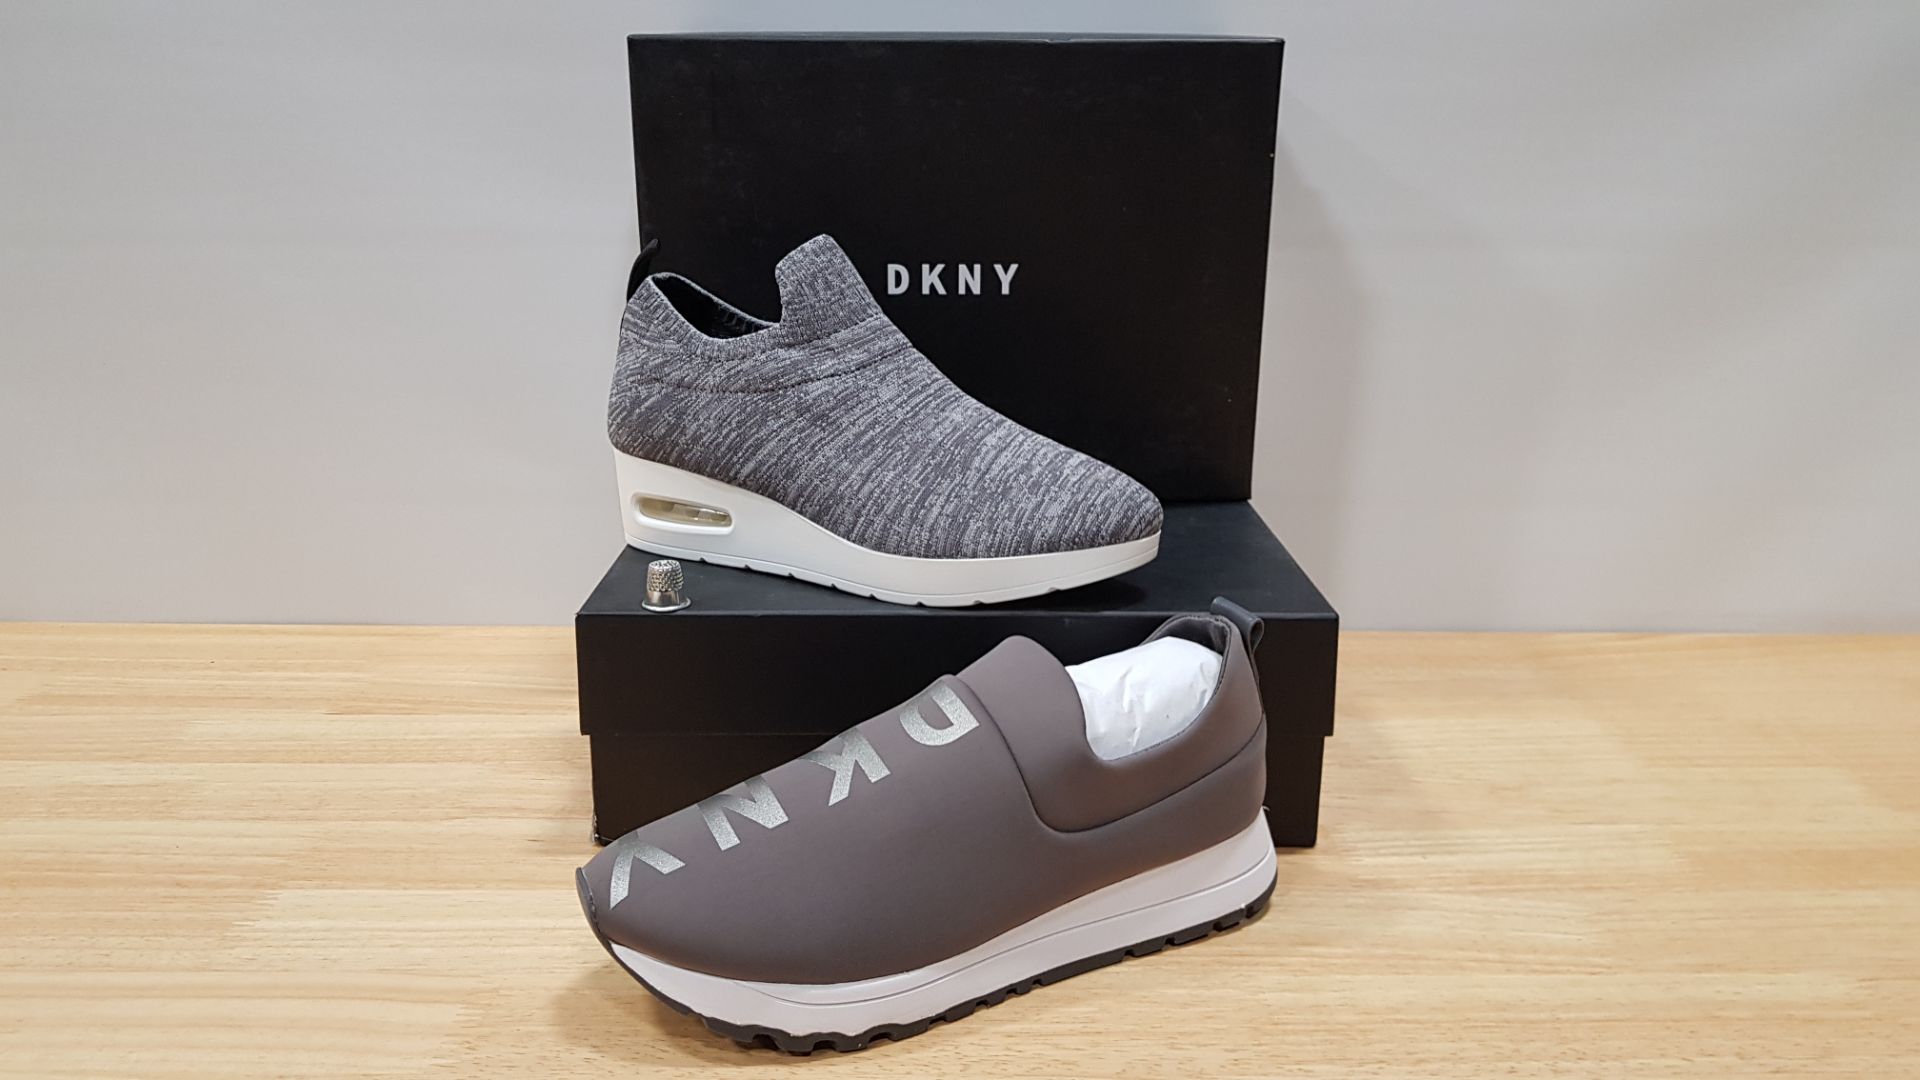 4 PIECE MIXED DKNY TRAINER LOT CONTAINING 2 X ANJI WEDGE SNEAKERS AND 2 X JADYN SLIP ON JOGGING